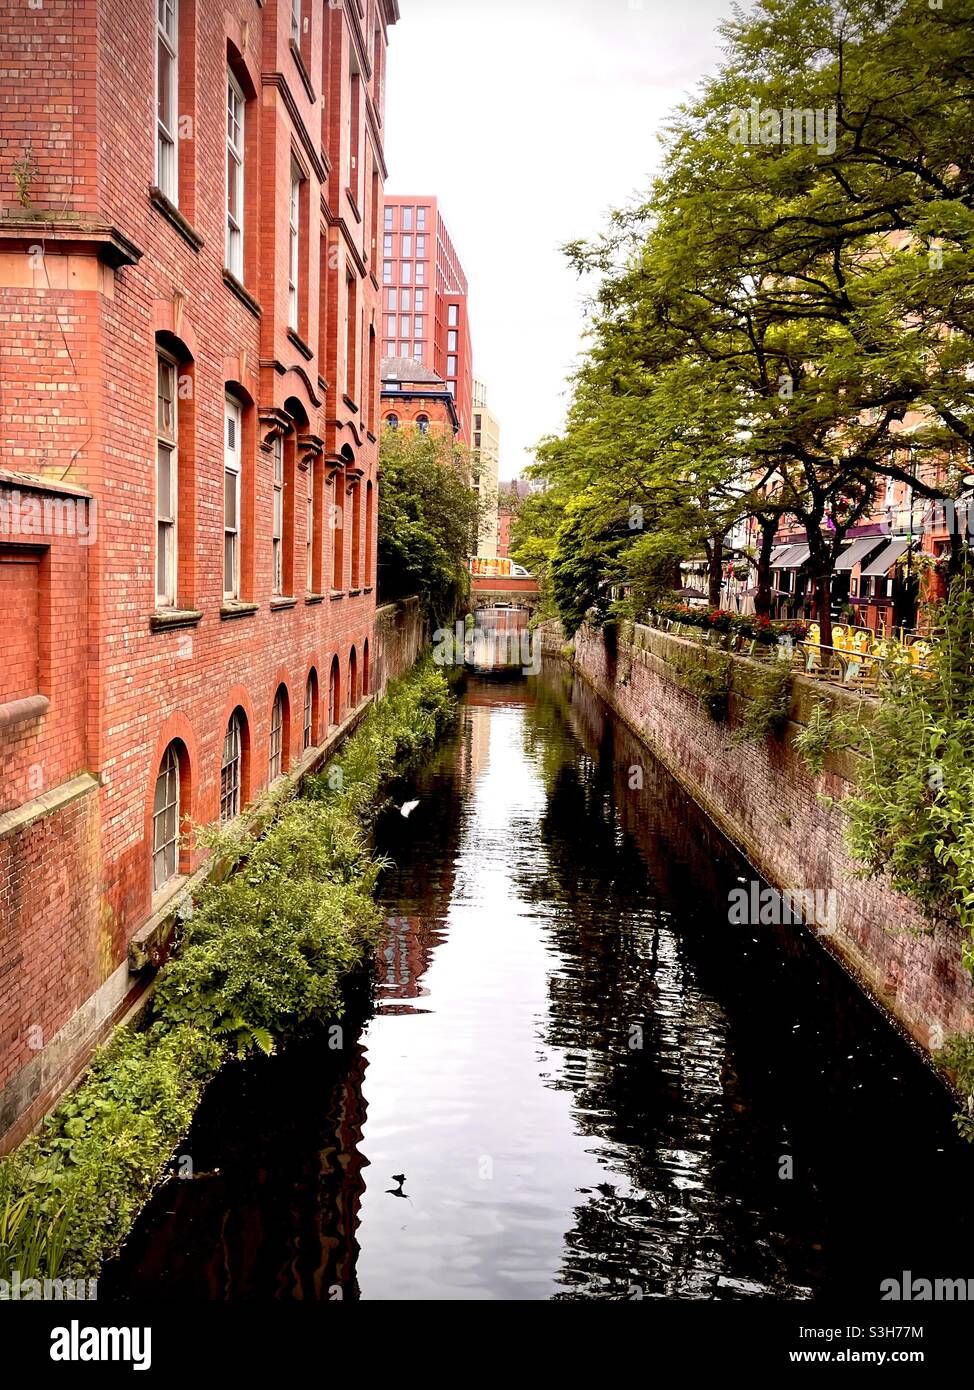 Manchester canal Stock Photo